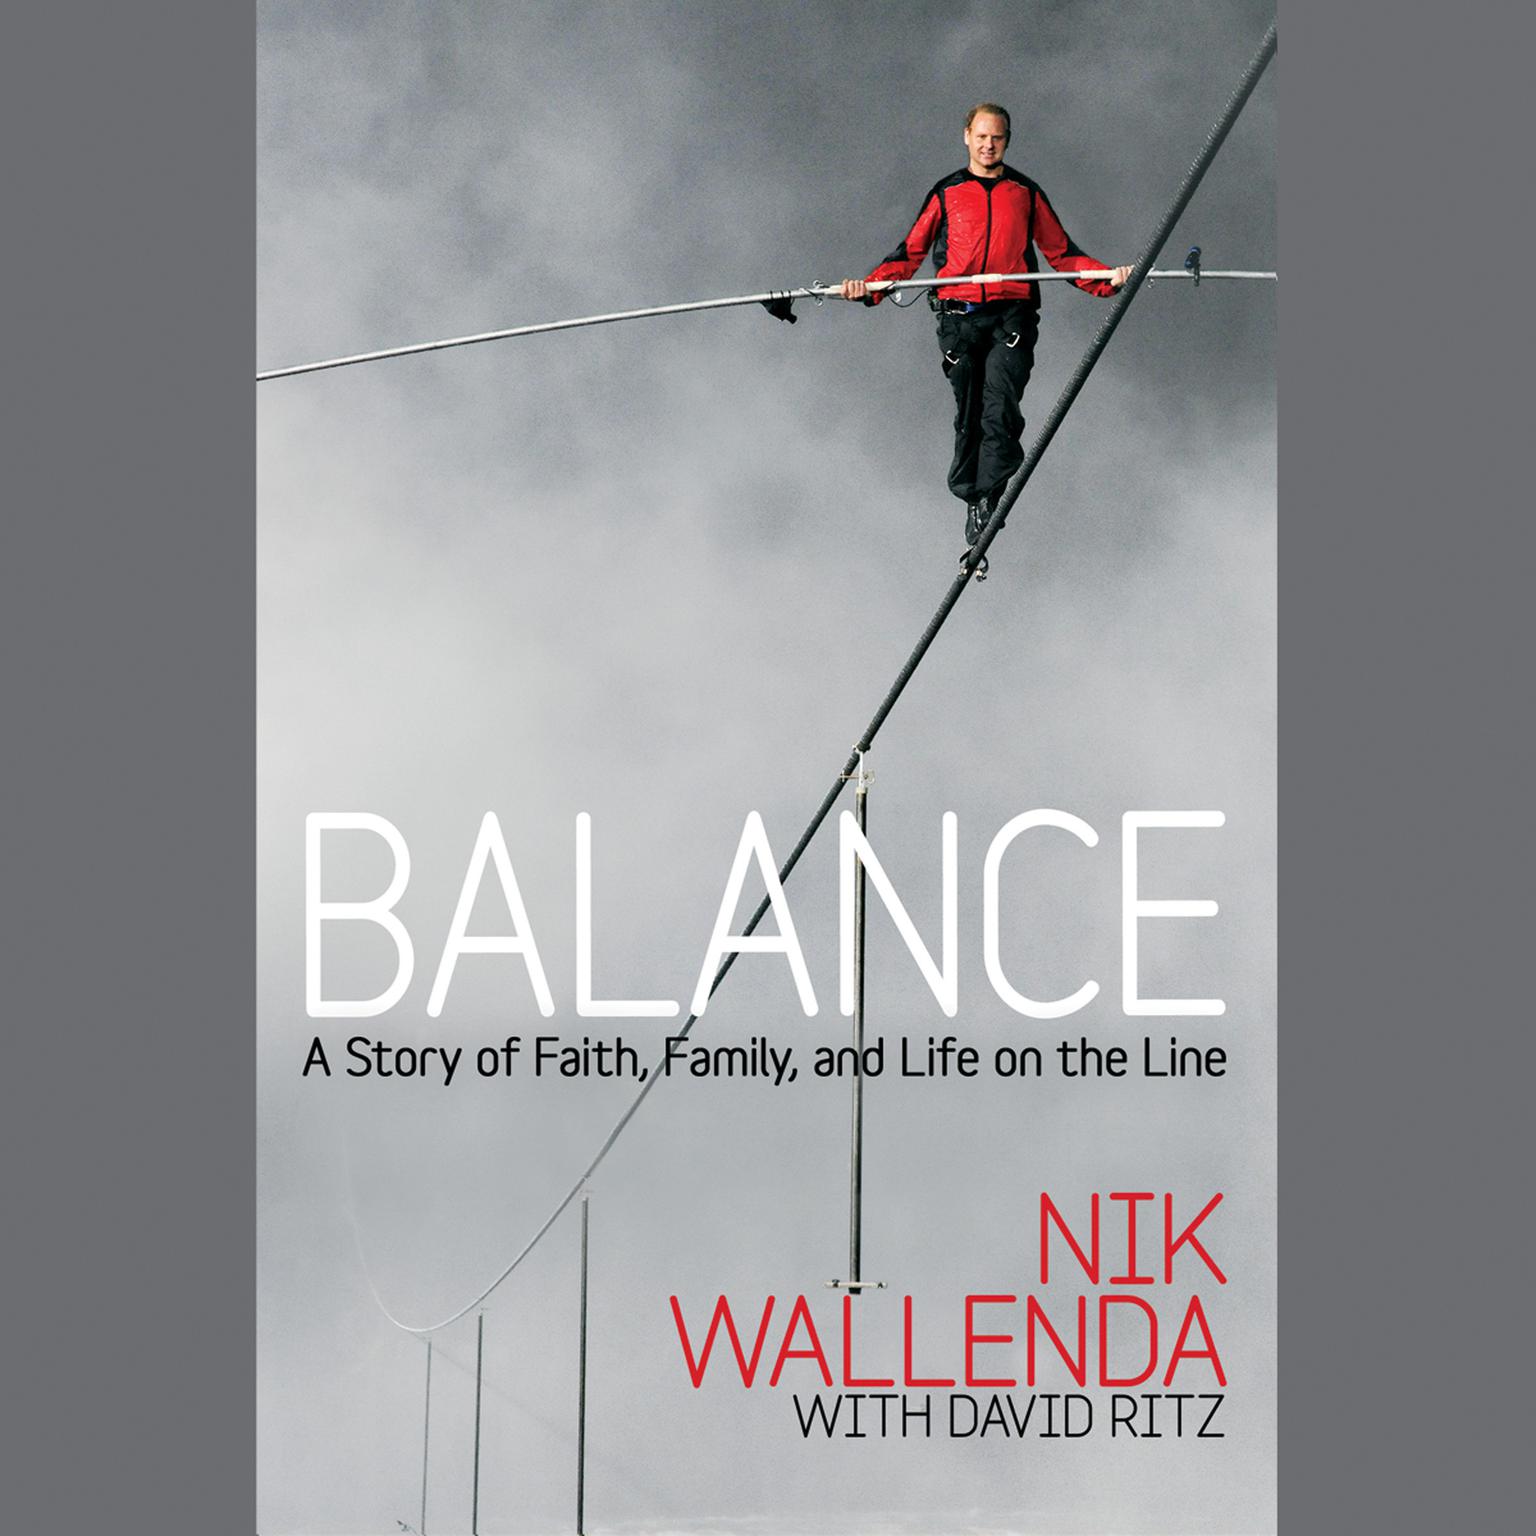 Balance: A Story of Faith, Family, and Life on the Line Audiobook, by Nik Wallenda